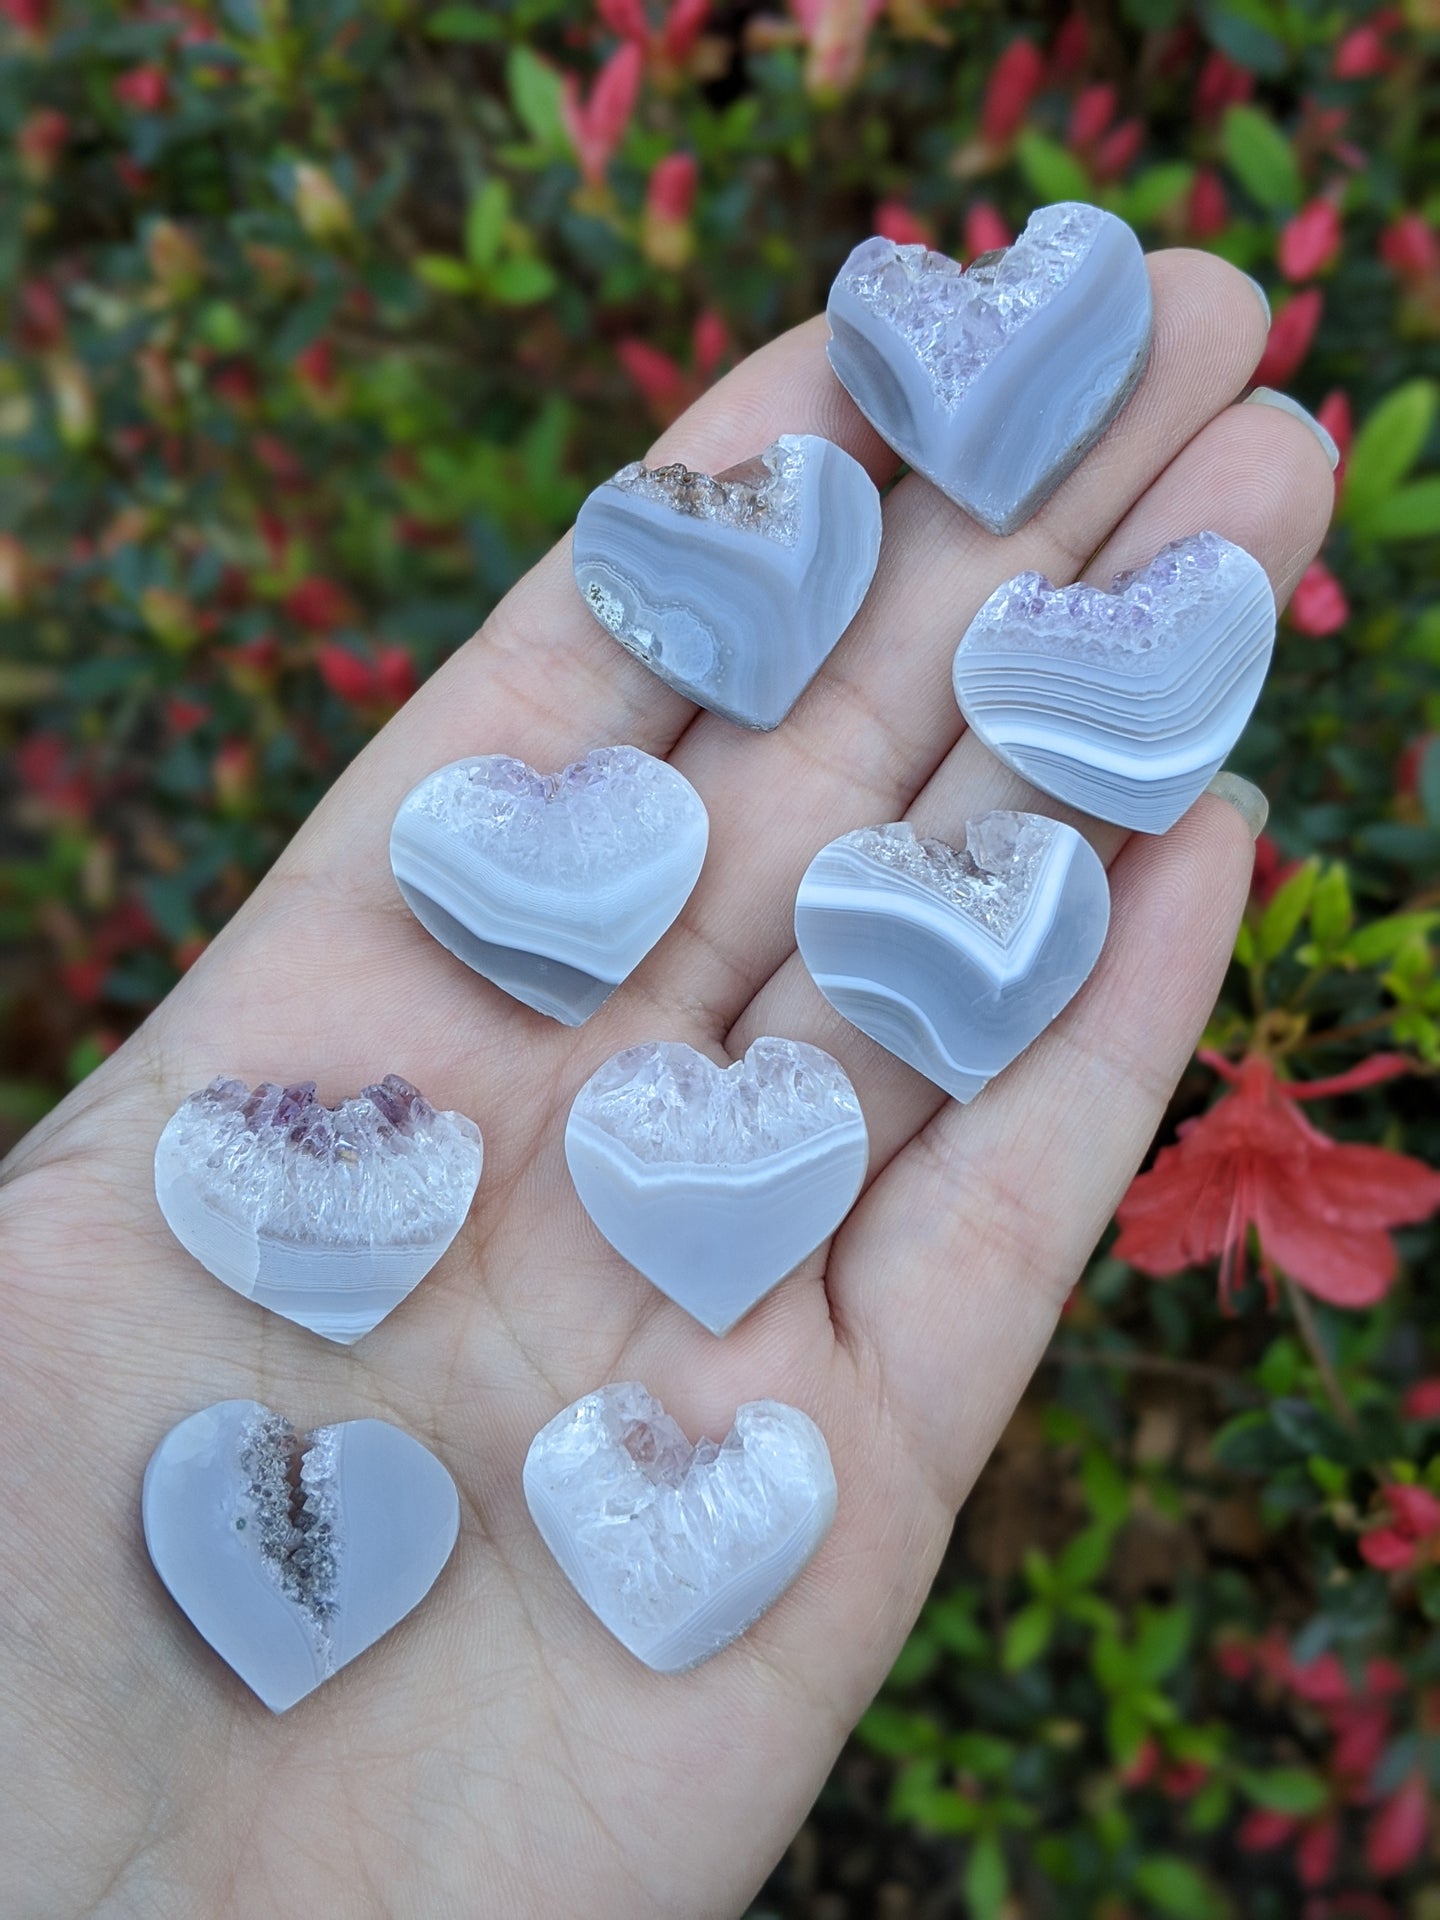 Amethyst and Agate Hearts